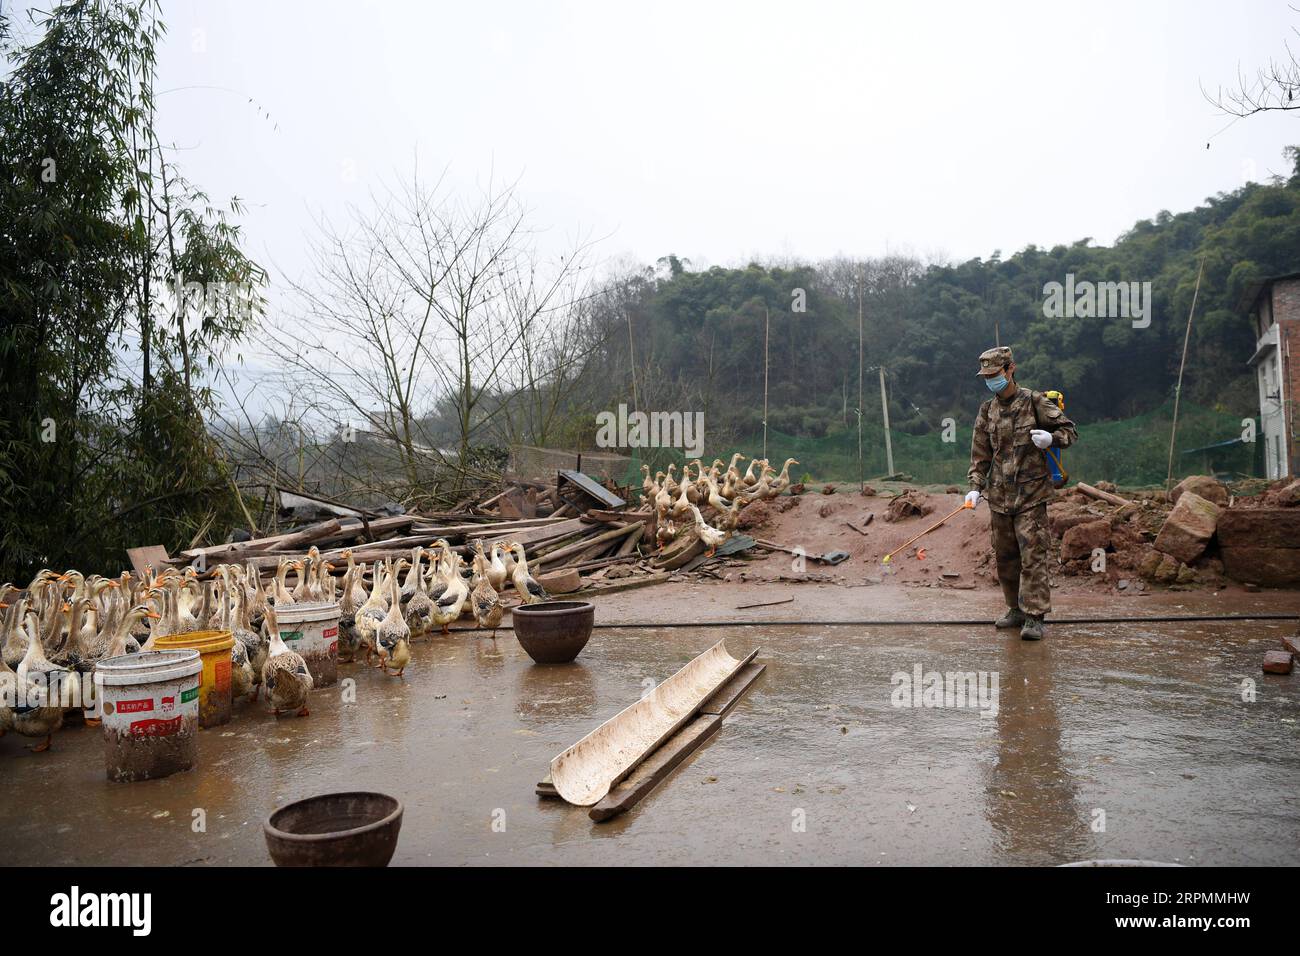 200214 -- CHONGQING, Feb. 14, 2020 -- A staff member disinfects farmer Fu Zongyong s duck shed at Shuangjing village of Yufengshan Town in Yubei District of southwest China s Chongqing Municipality, Feb. 14, 2020. Since the outbreak of the novel coronavirus, Fu Zongyong, a poverty-striken farmer has been unable to sell his ducks due to the closing of live poultry markets. Local authorities sent staff to help him with quarantine and sales of ducks to ensure his income during the battle against the epidemic.  CHINA-CHONGQING-NCP-PREVENTION-POVERTY ALLEVIATION CN TangxYi PUBLICATIONxNOTxINxCHN Stock Photo